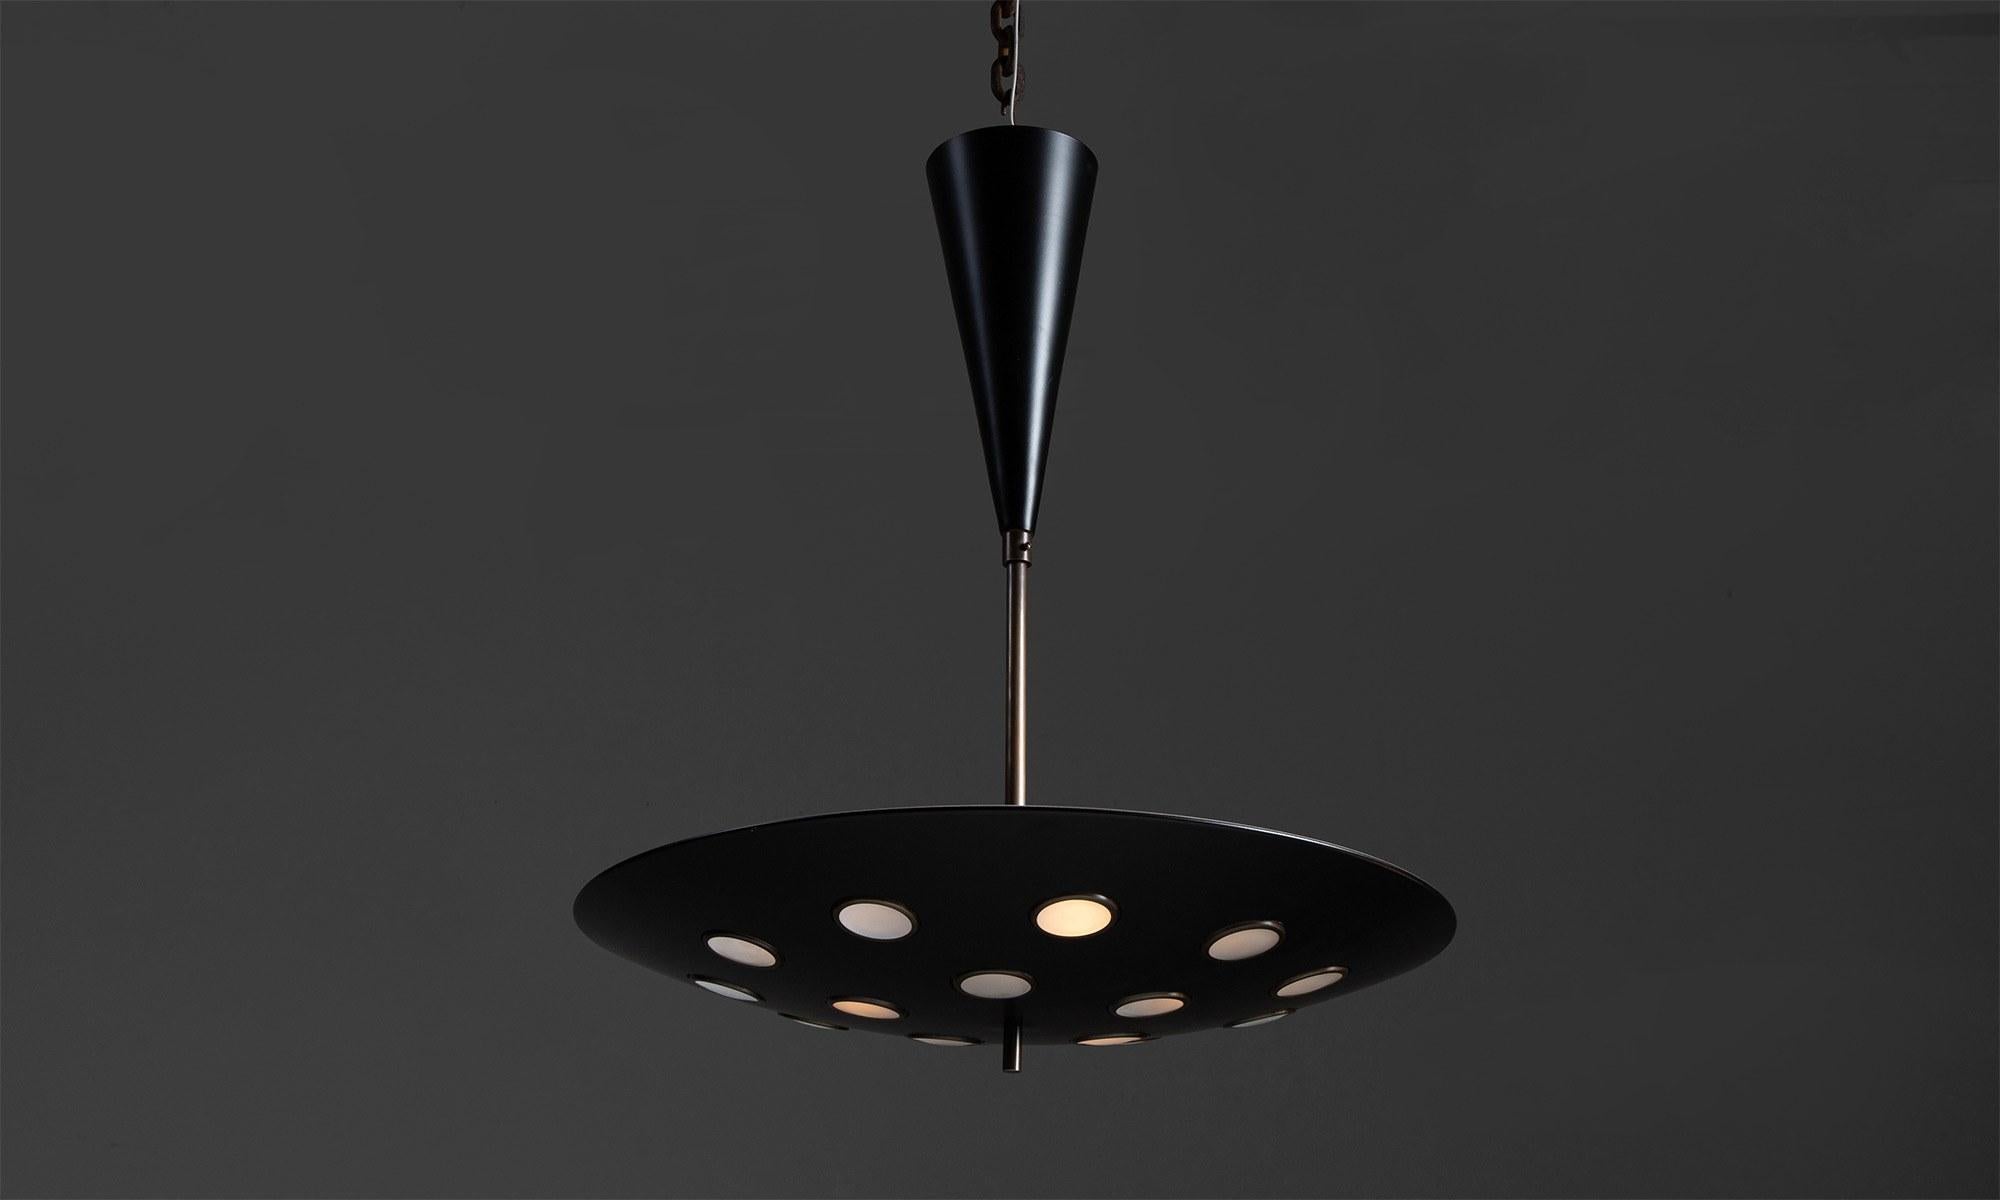 Black Cutout Chandelier
Made in Italy
Brass chandelier with painted aluminum disc with 15 satin lenses.
24”d x 24”h
Ref. L4385

*4-6 Week Lead Time*
*EU Wiring / Not UL Listed*
*Cone Canopy (12.25